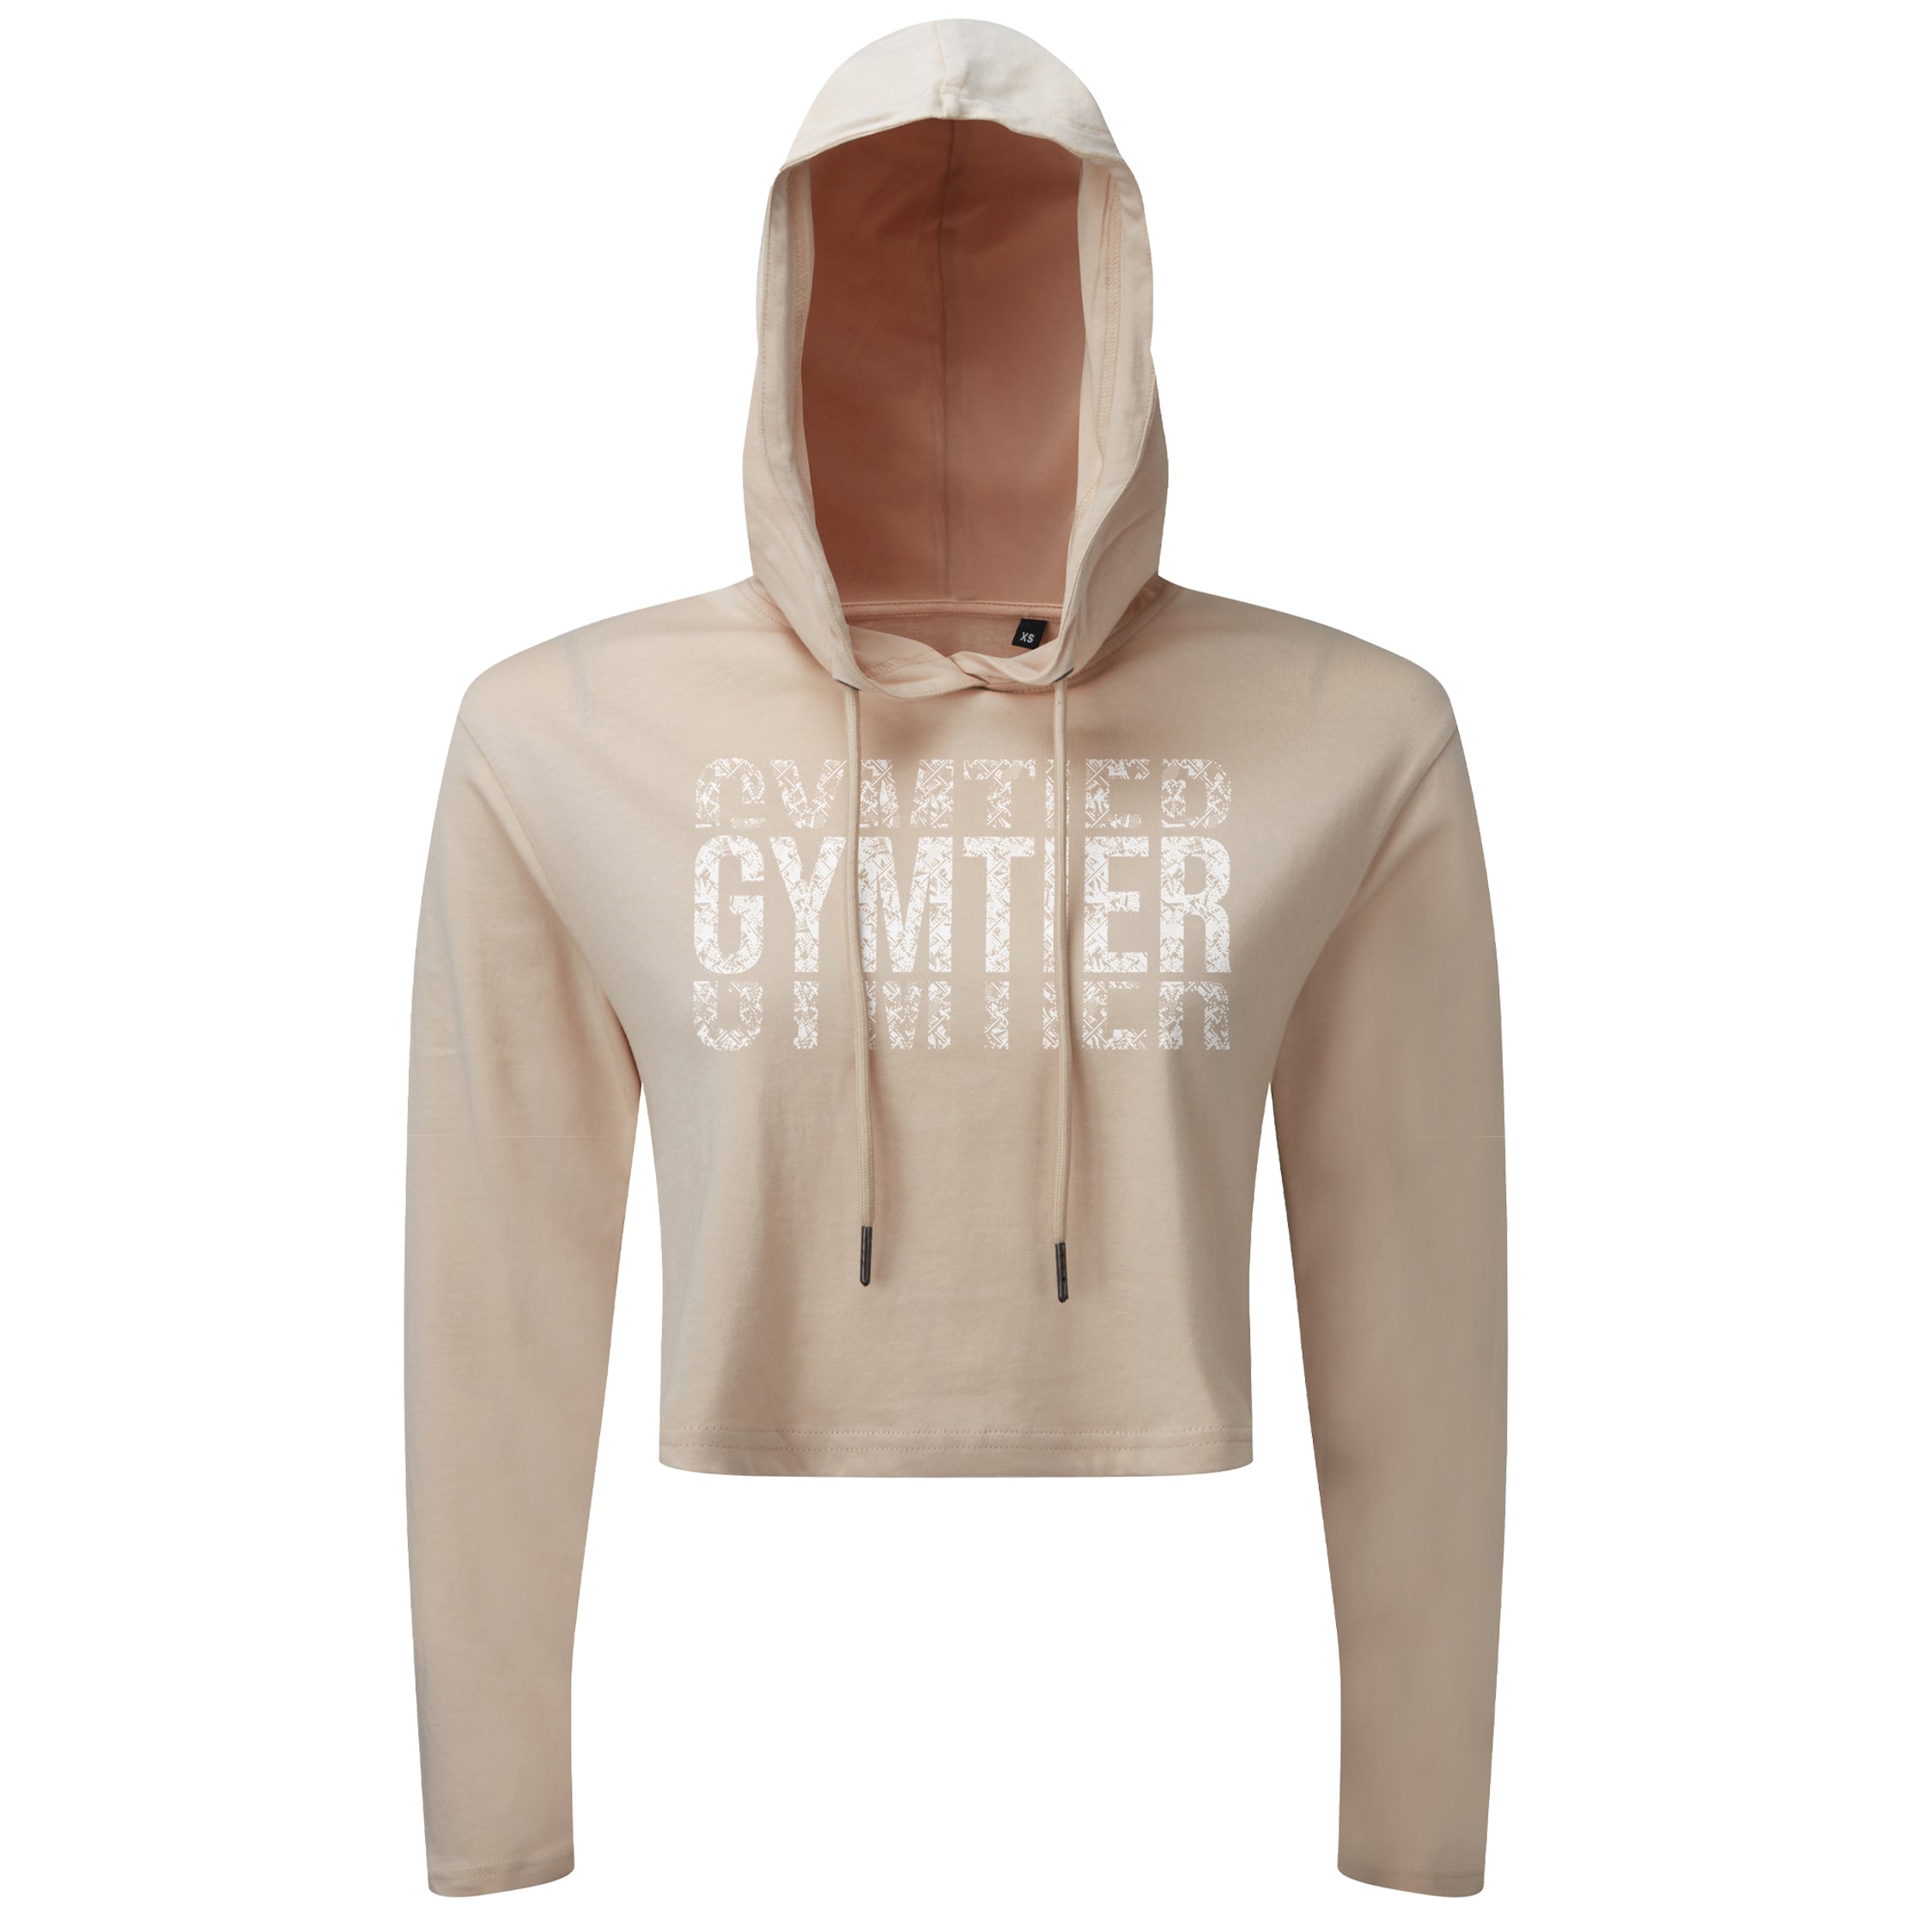 Gymtier - Cropped Hoodie